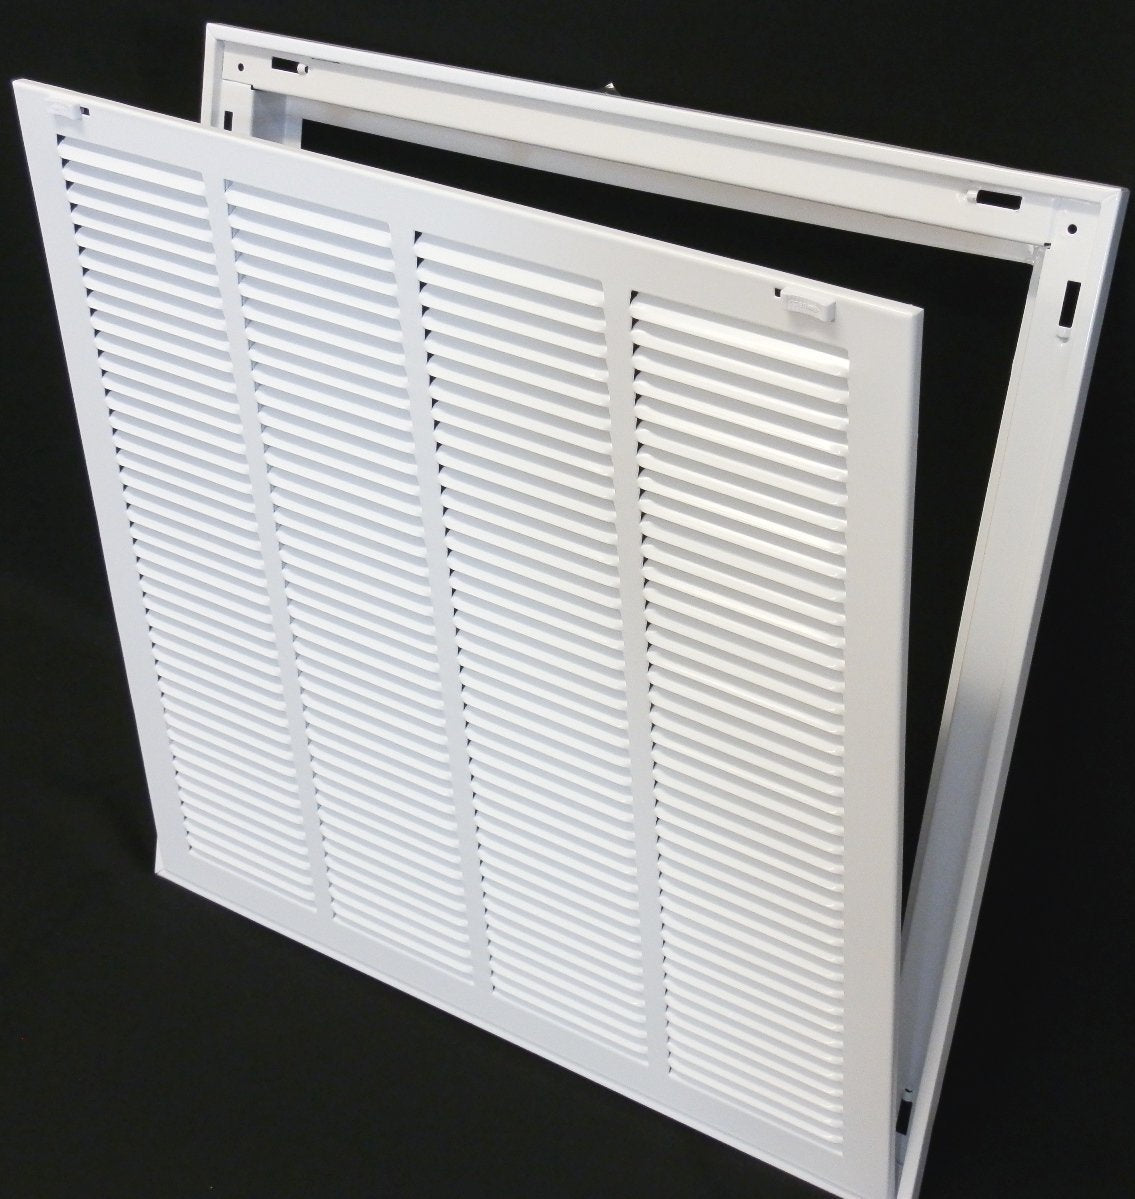 10&quot; X 26&quot; Steel Return Air Filter Grille for 1&quot; Filter - Removable Frame - [Outer Dimensions: 12 5/8&quot; X 28 5/8&quot;]